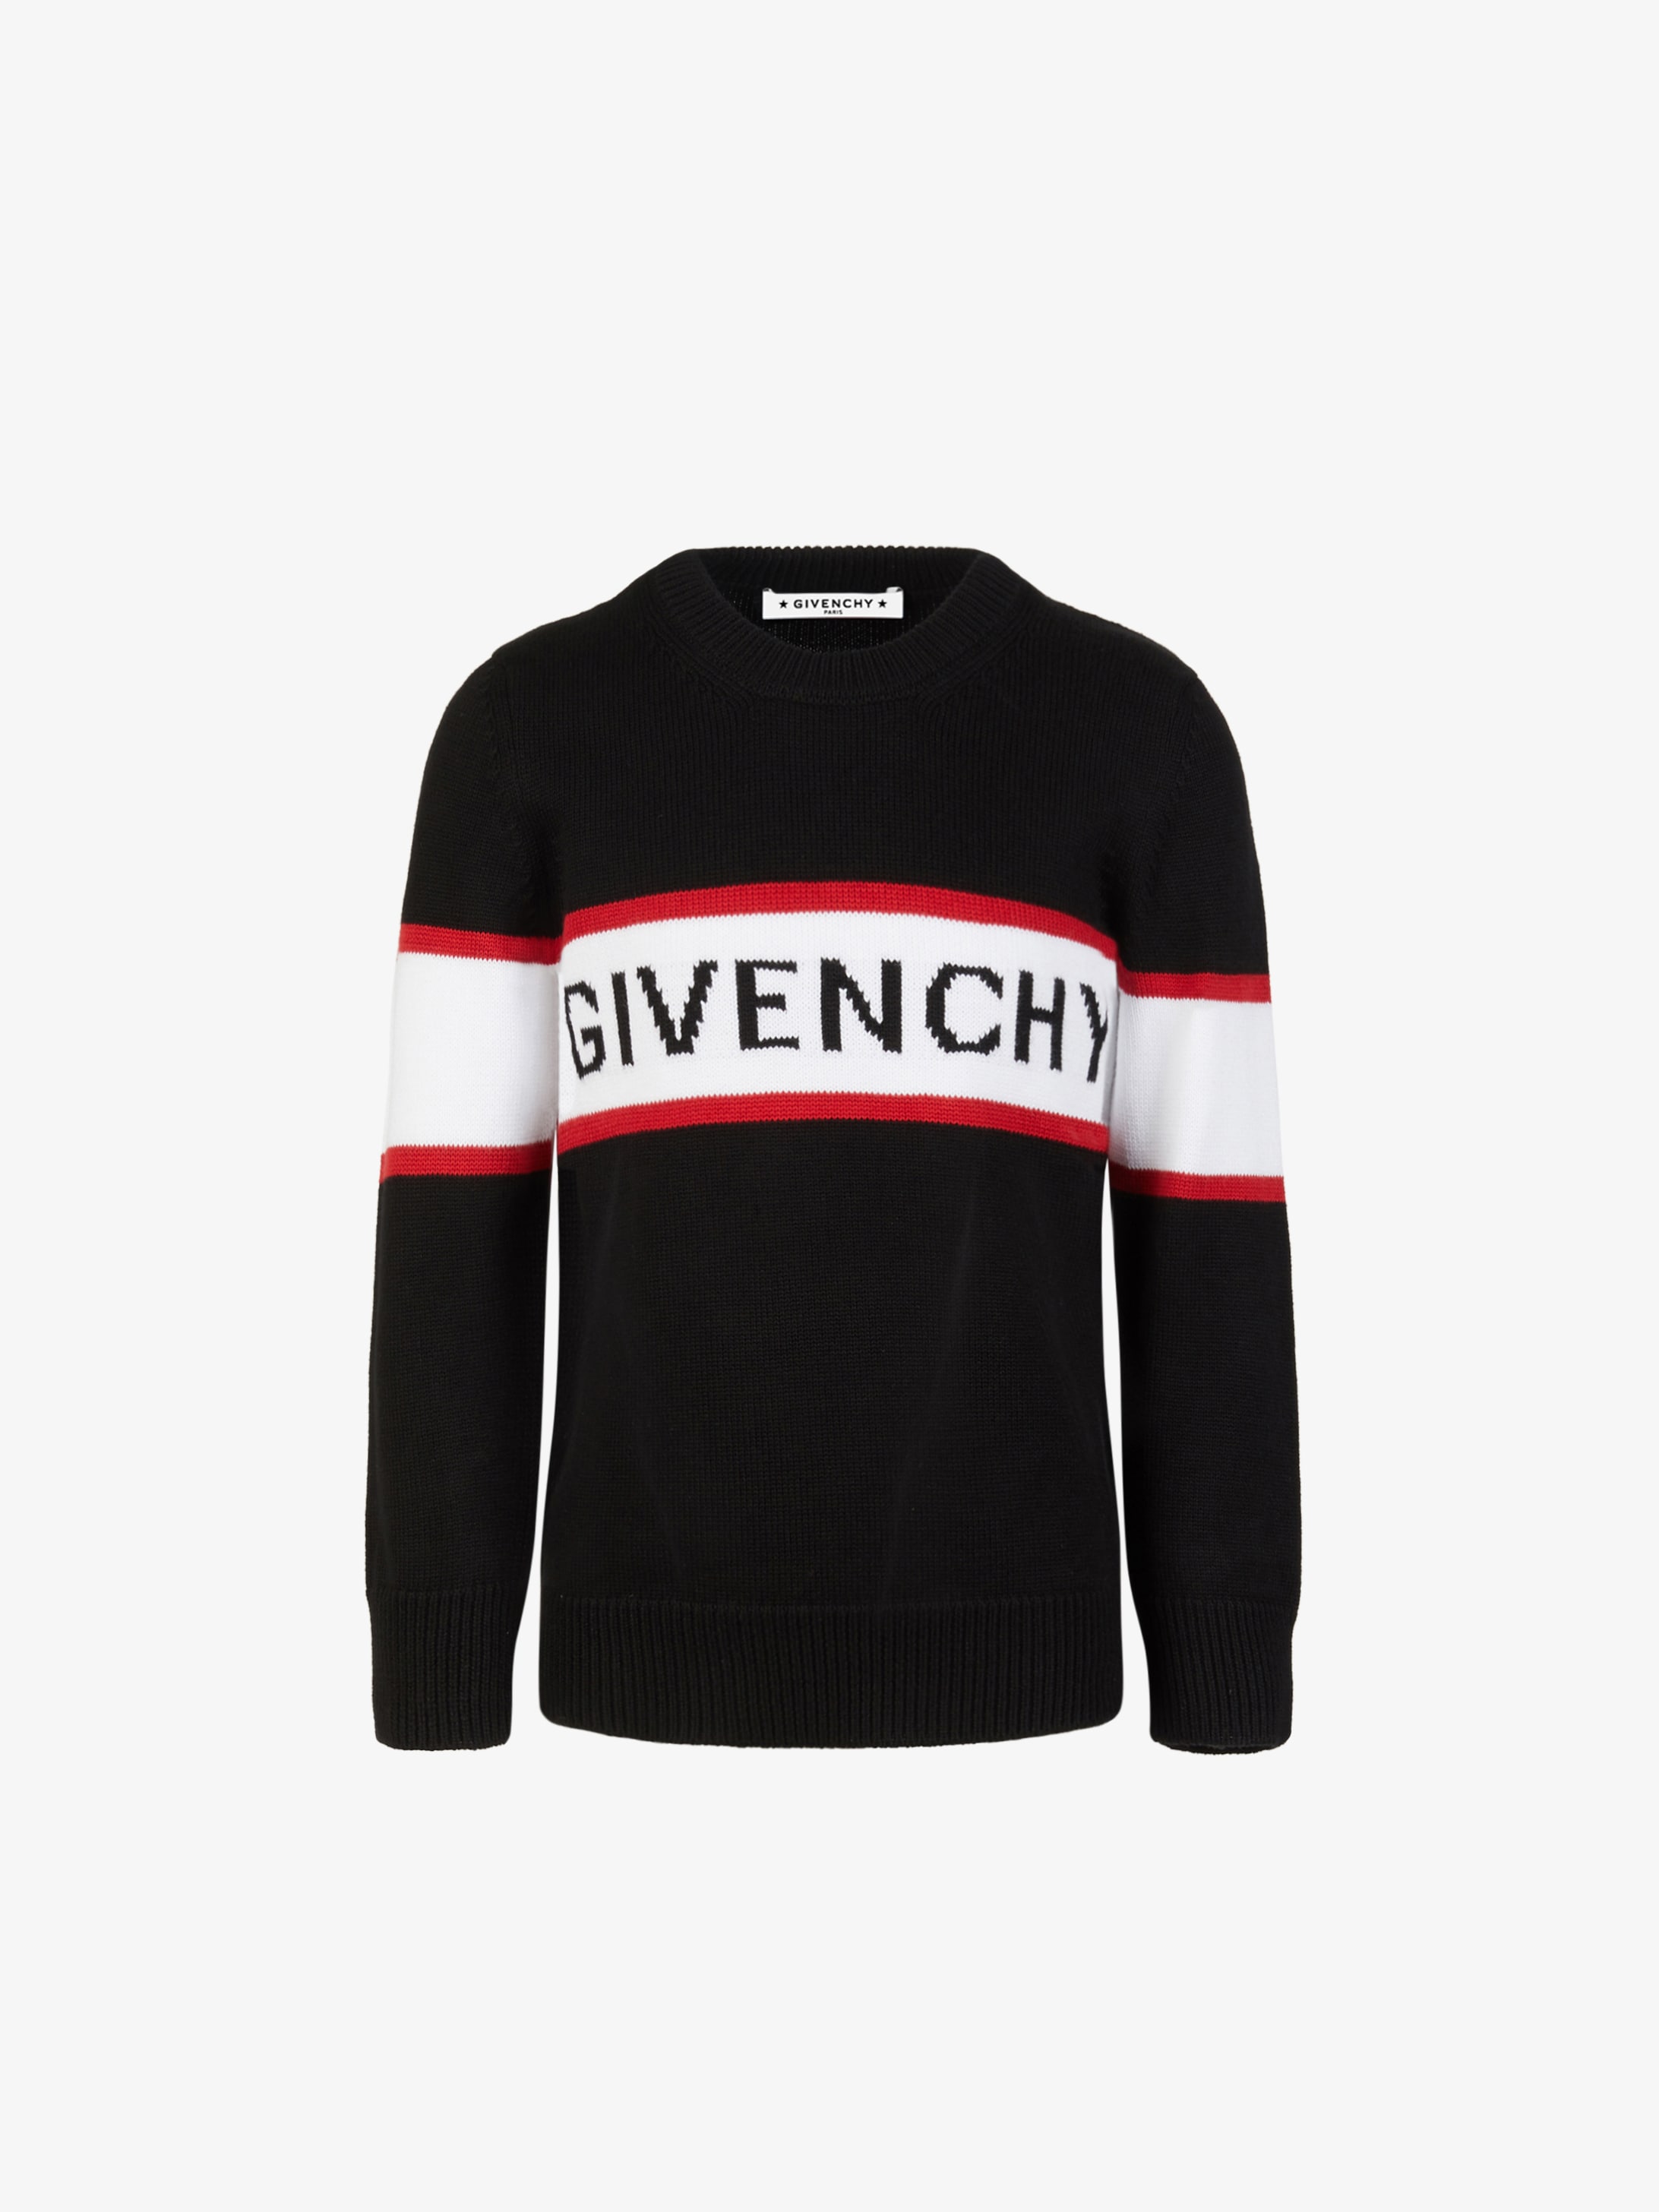 GIVENCHY band three-colored sweater | GIVENCHY Paris